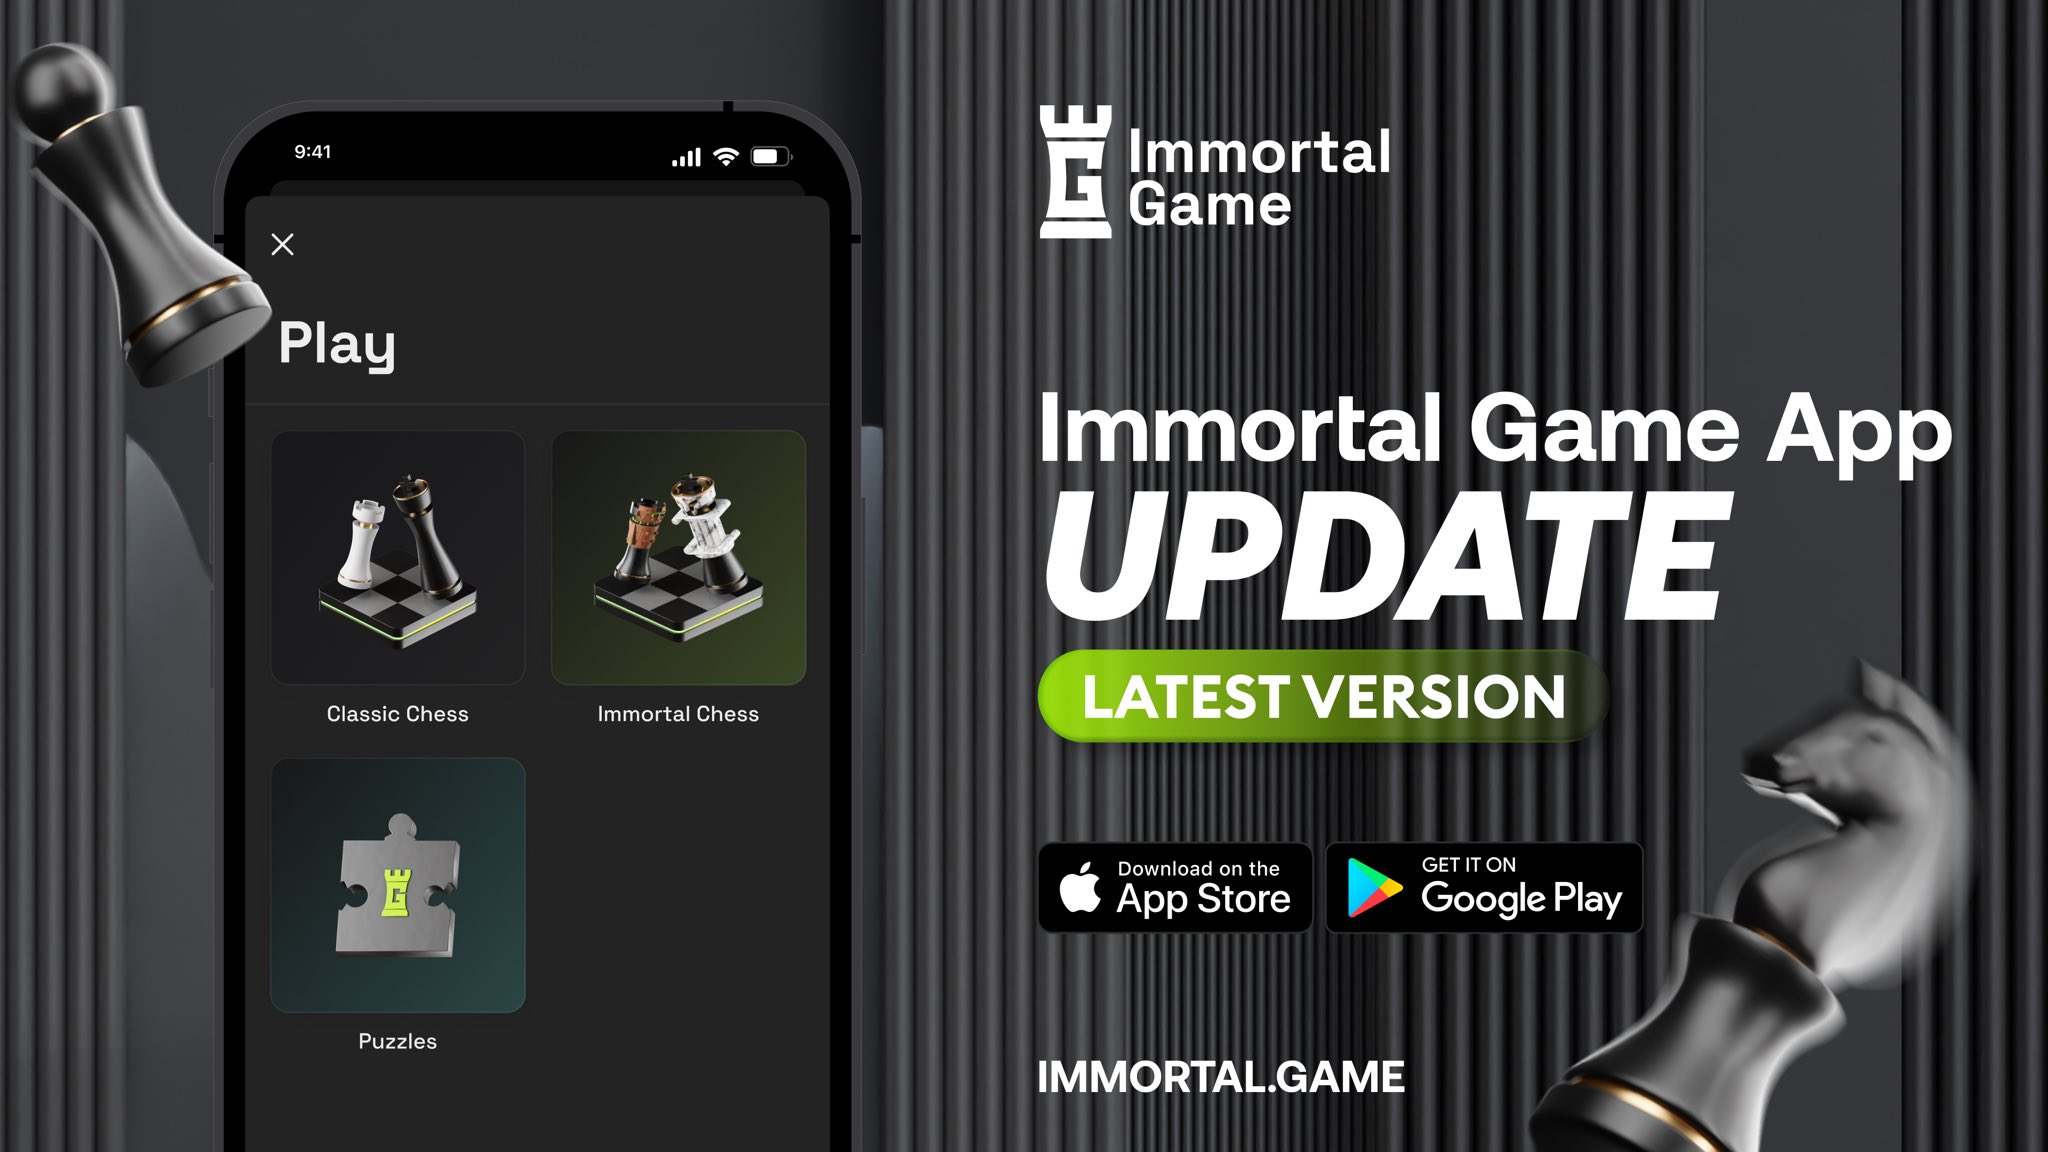 Immortal Game on X: THE UPDATE IS HERE! 💥 Immortal Game has been